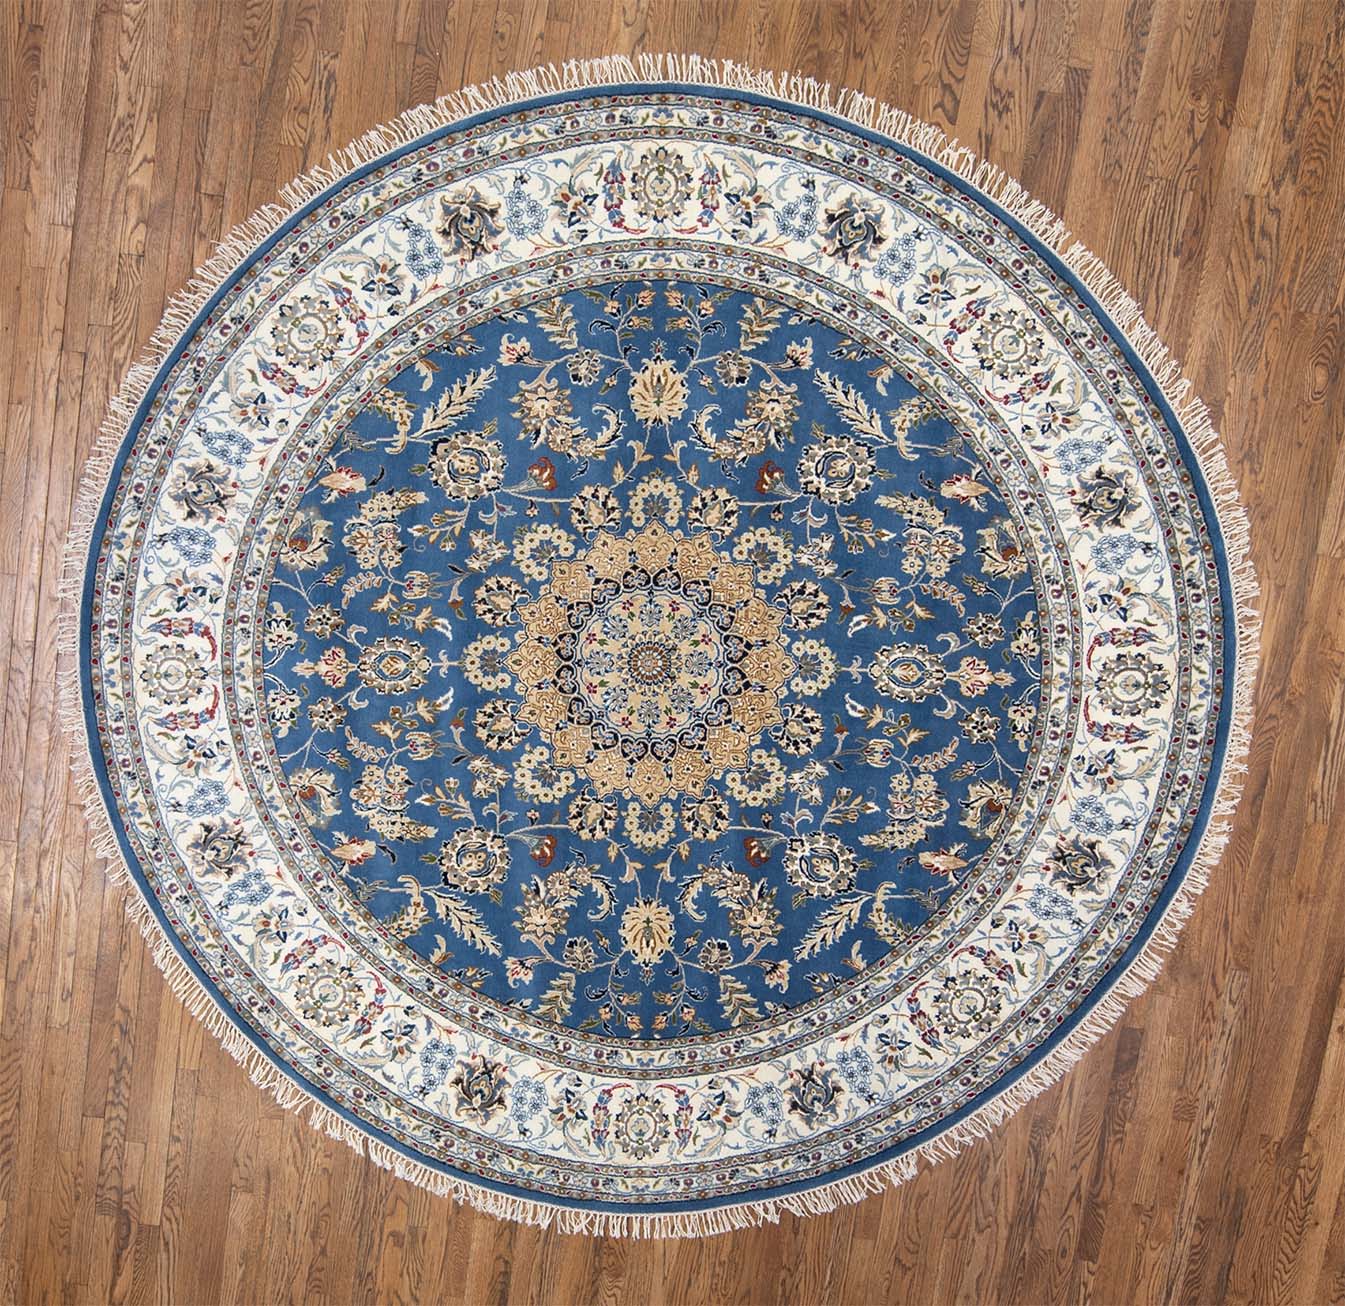 9 ft round rug. Handmade wool Persian Nain style rug in beautiful blue color made in India. Rug size 9.3x9.3.